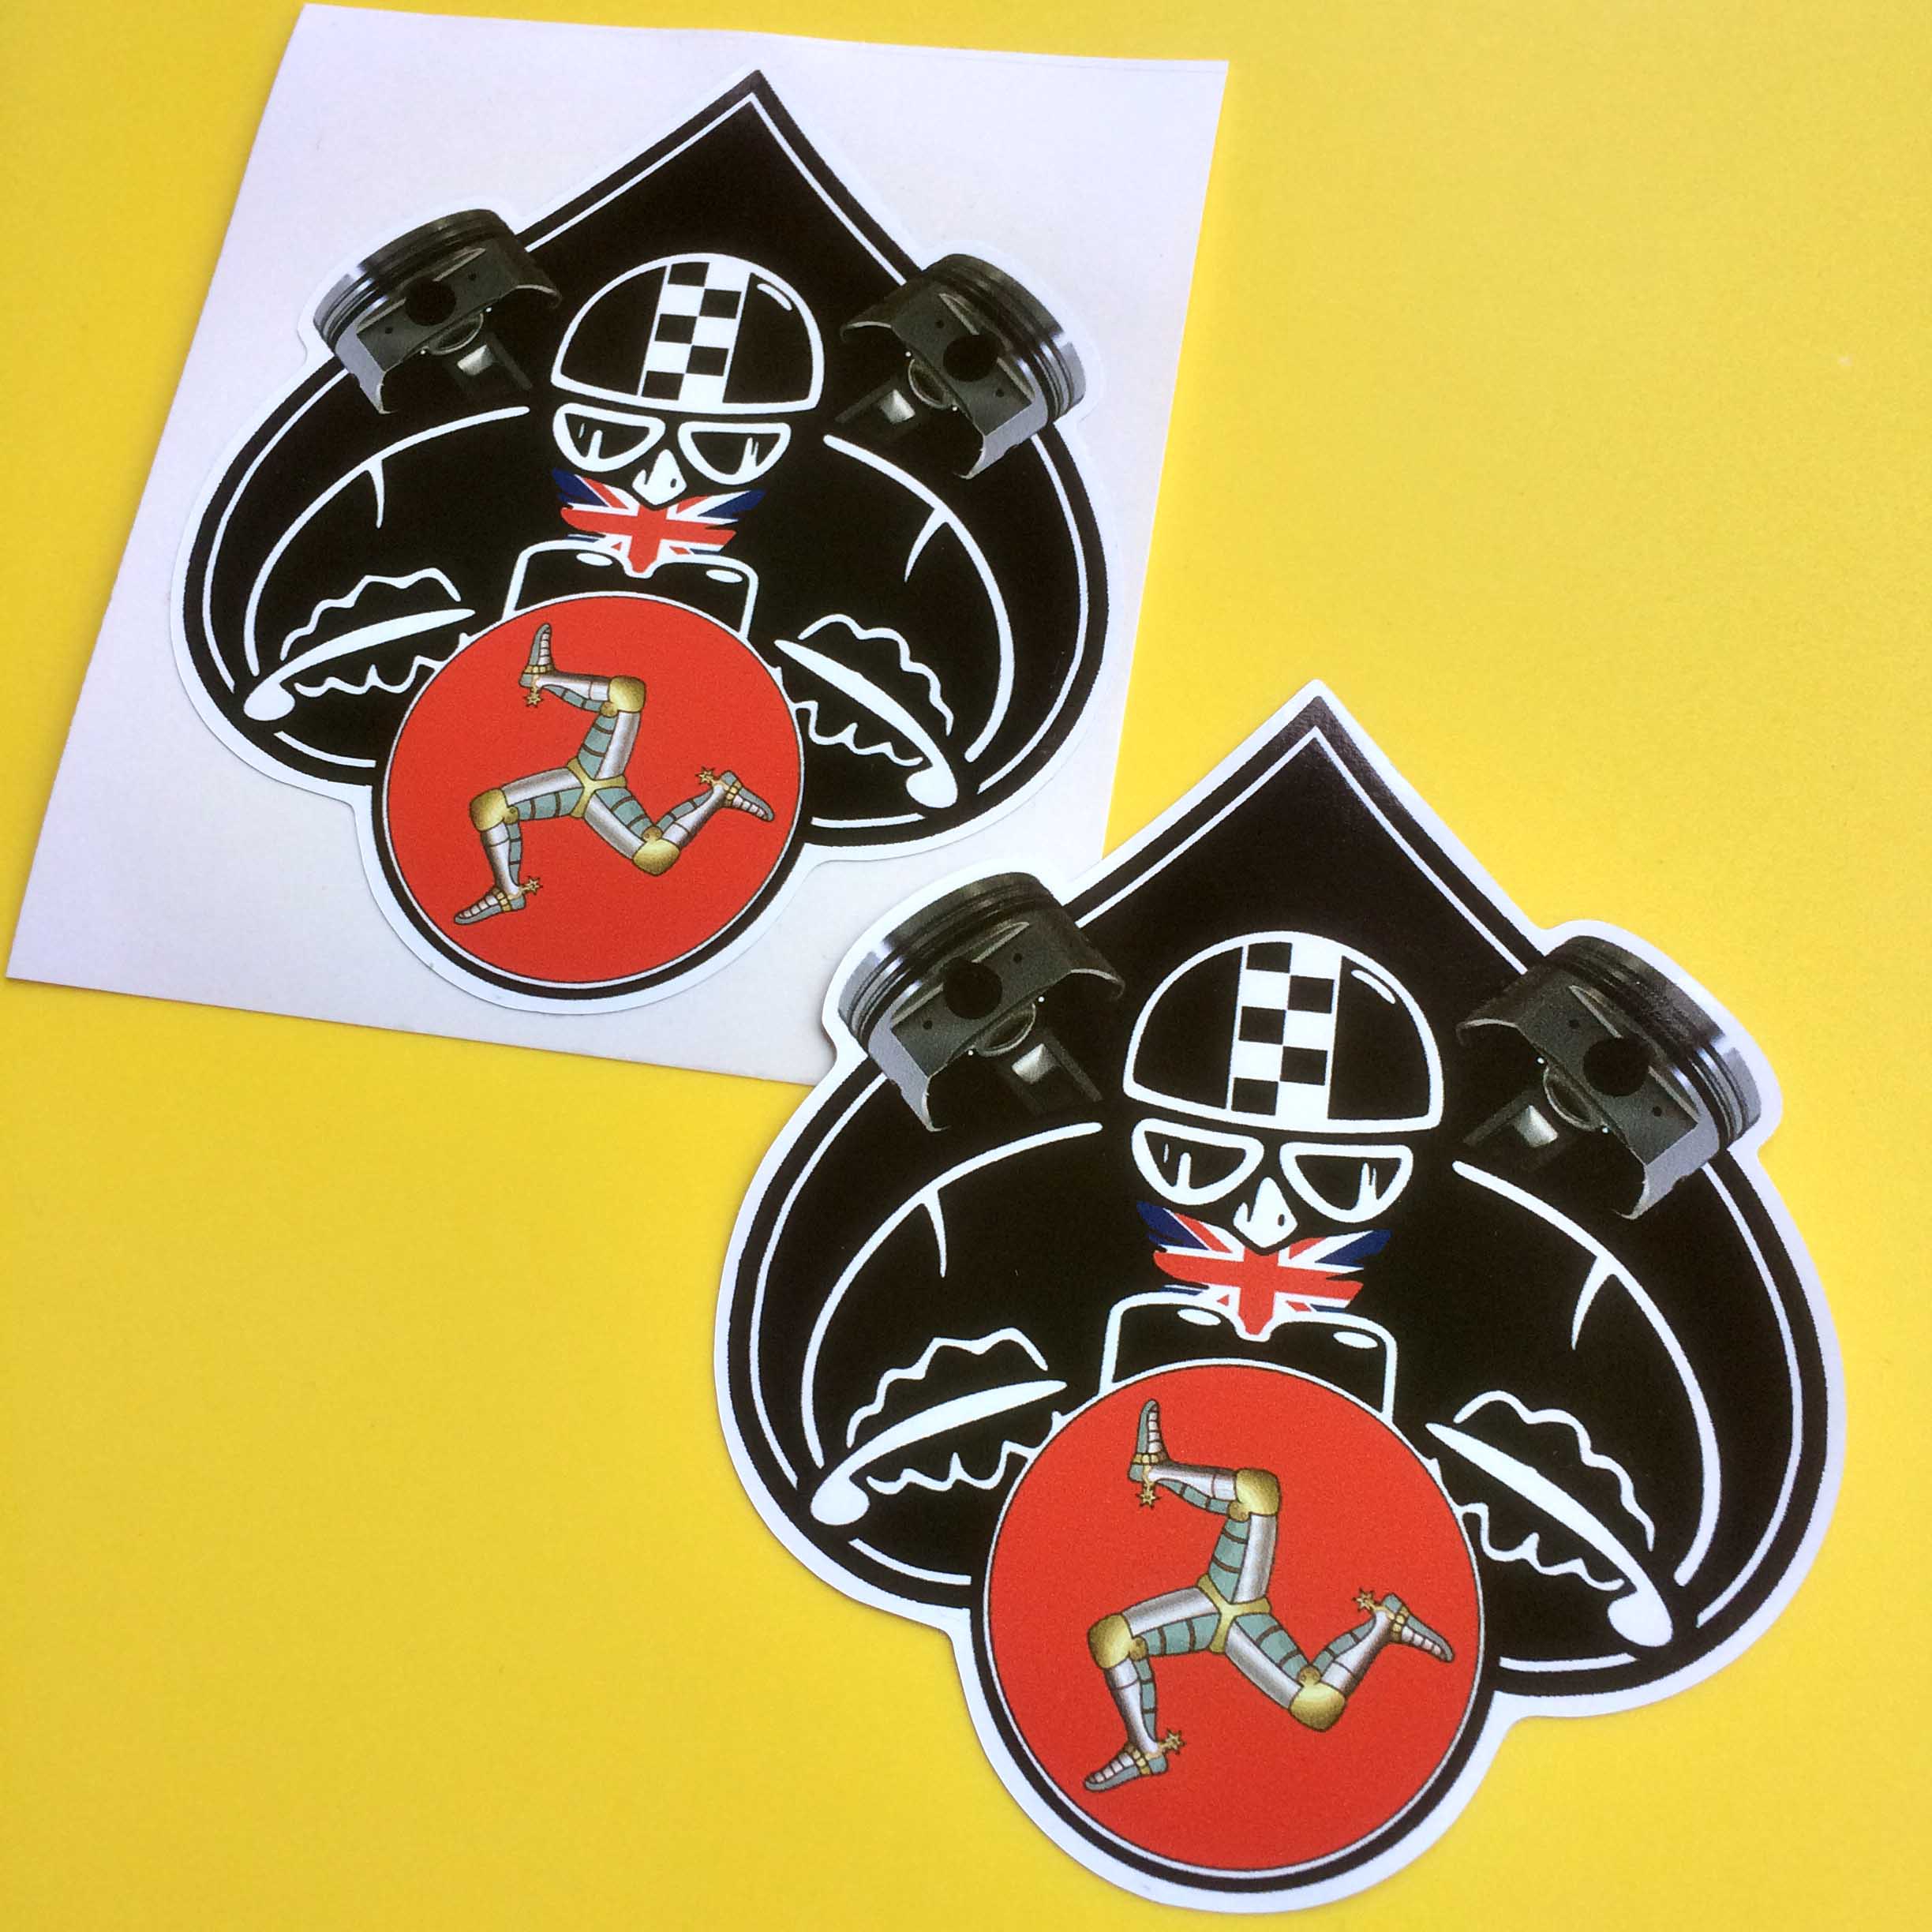 ISLE OF MAN CAFE RACER STICKERS. An inverted Ace of Spade above a circular Isle Of Man flag. Overlaying the Ace Of Spade are two piston heads and a motorcyclist wearing a chequered and Union Jack emblazoned helmet.